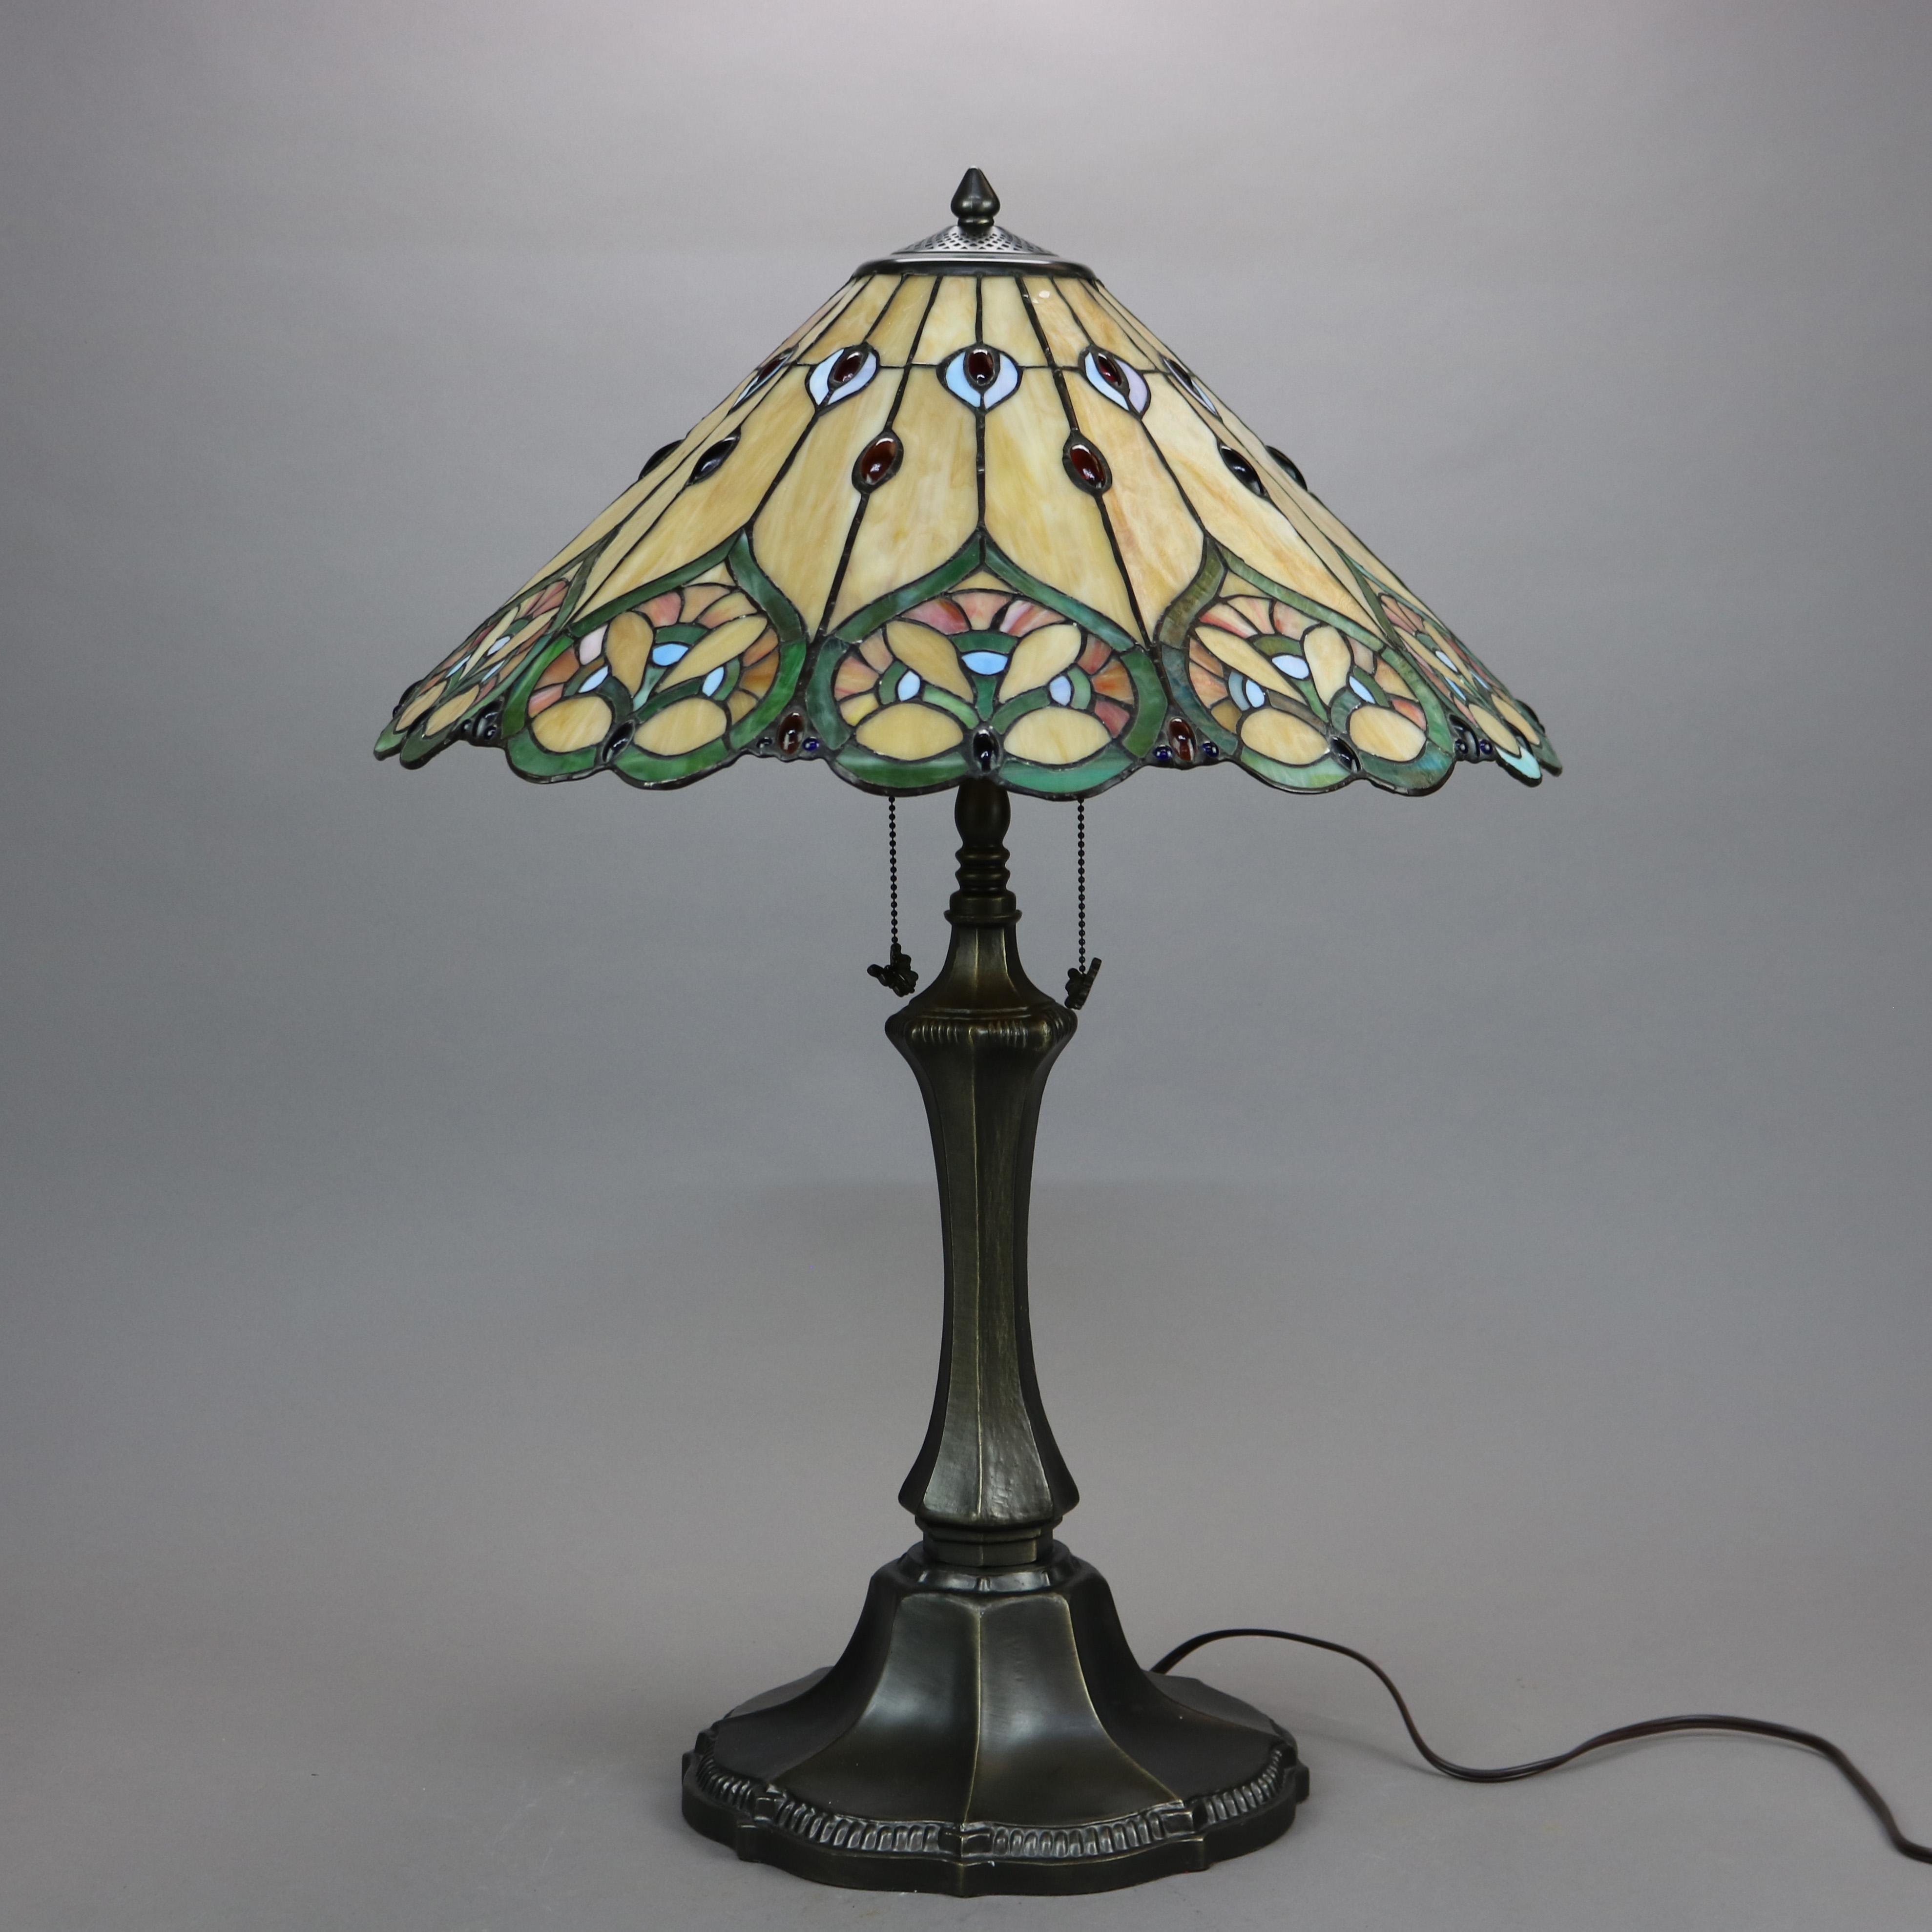 An Arts & Crafts Tiffany style table lamp offers a leaded stained glass conical shade having stylized floral design over double socket bronzed metal base, 20th century.

Measures- 29.75''H x 11''W x 11''D.